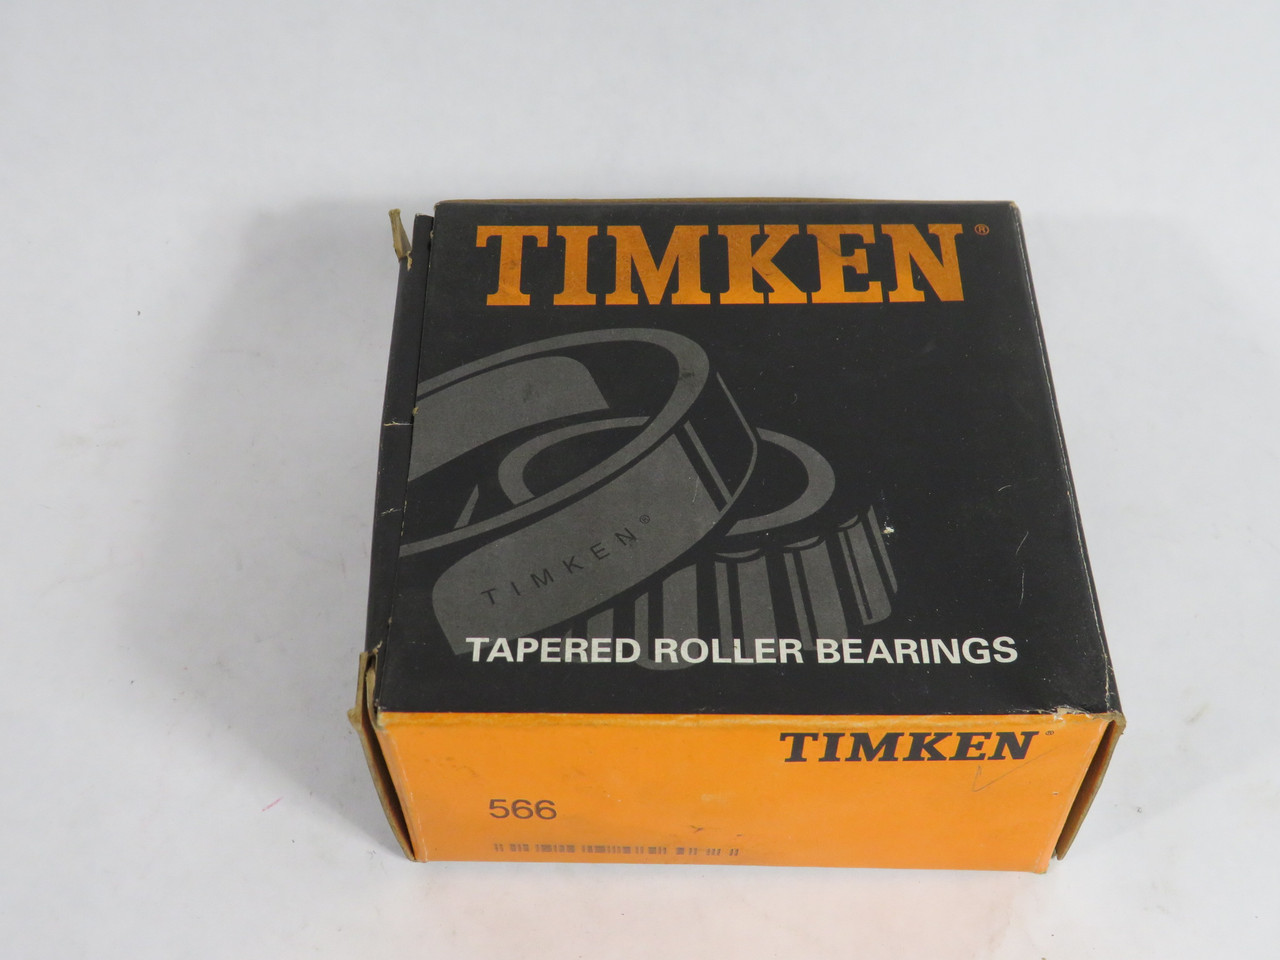 Timken 566 Tapered Roller Bearing Cone 2.750"ID 1.4240"W NEW